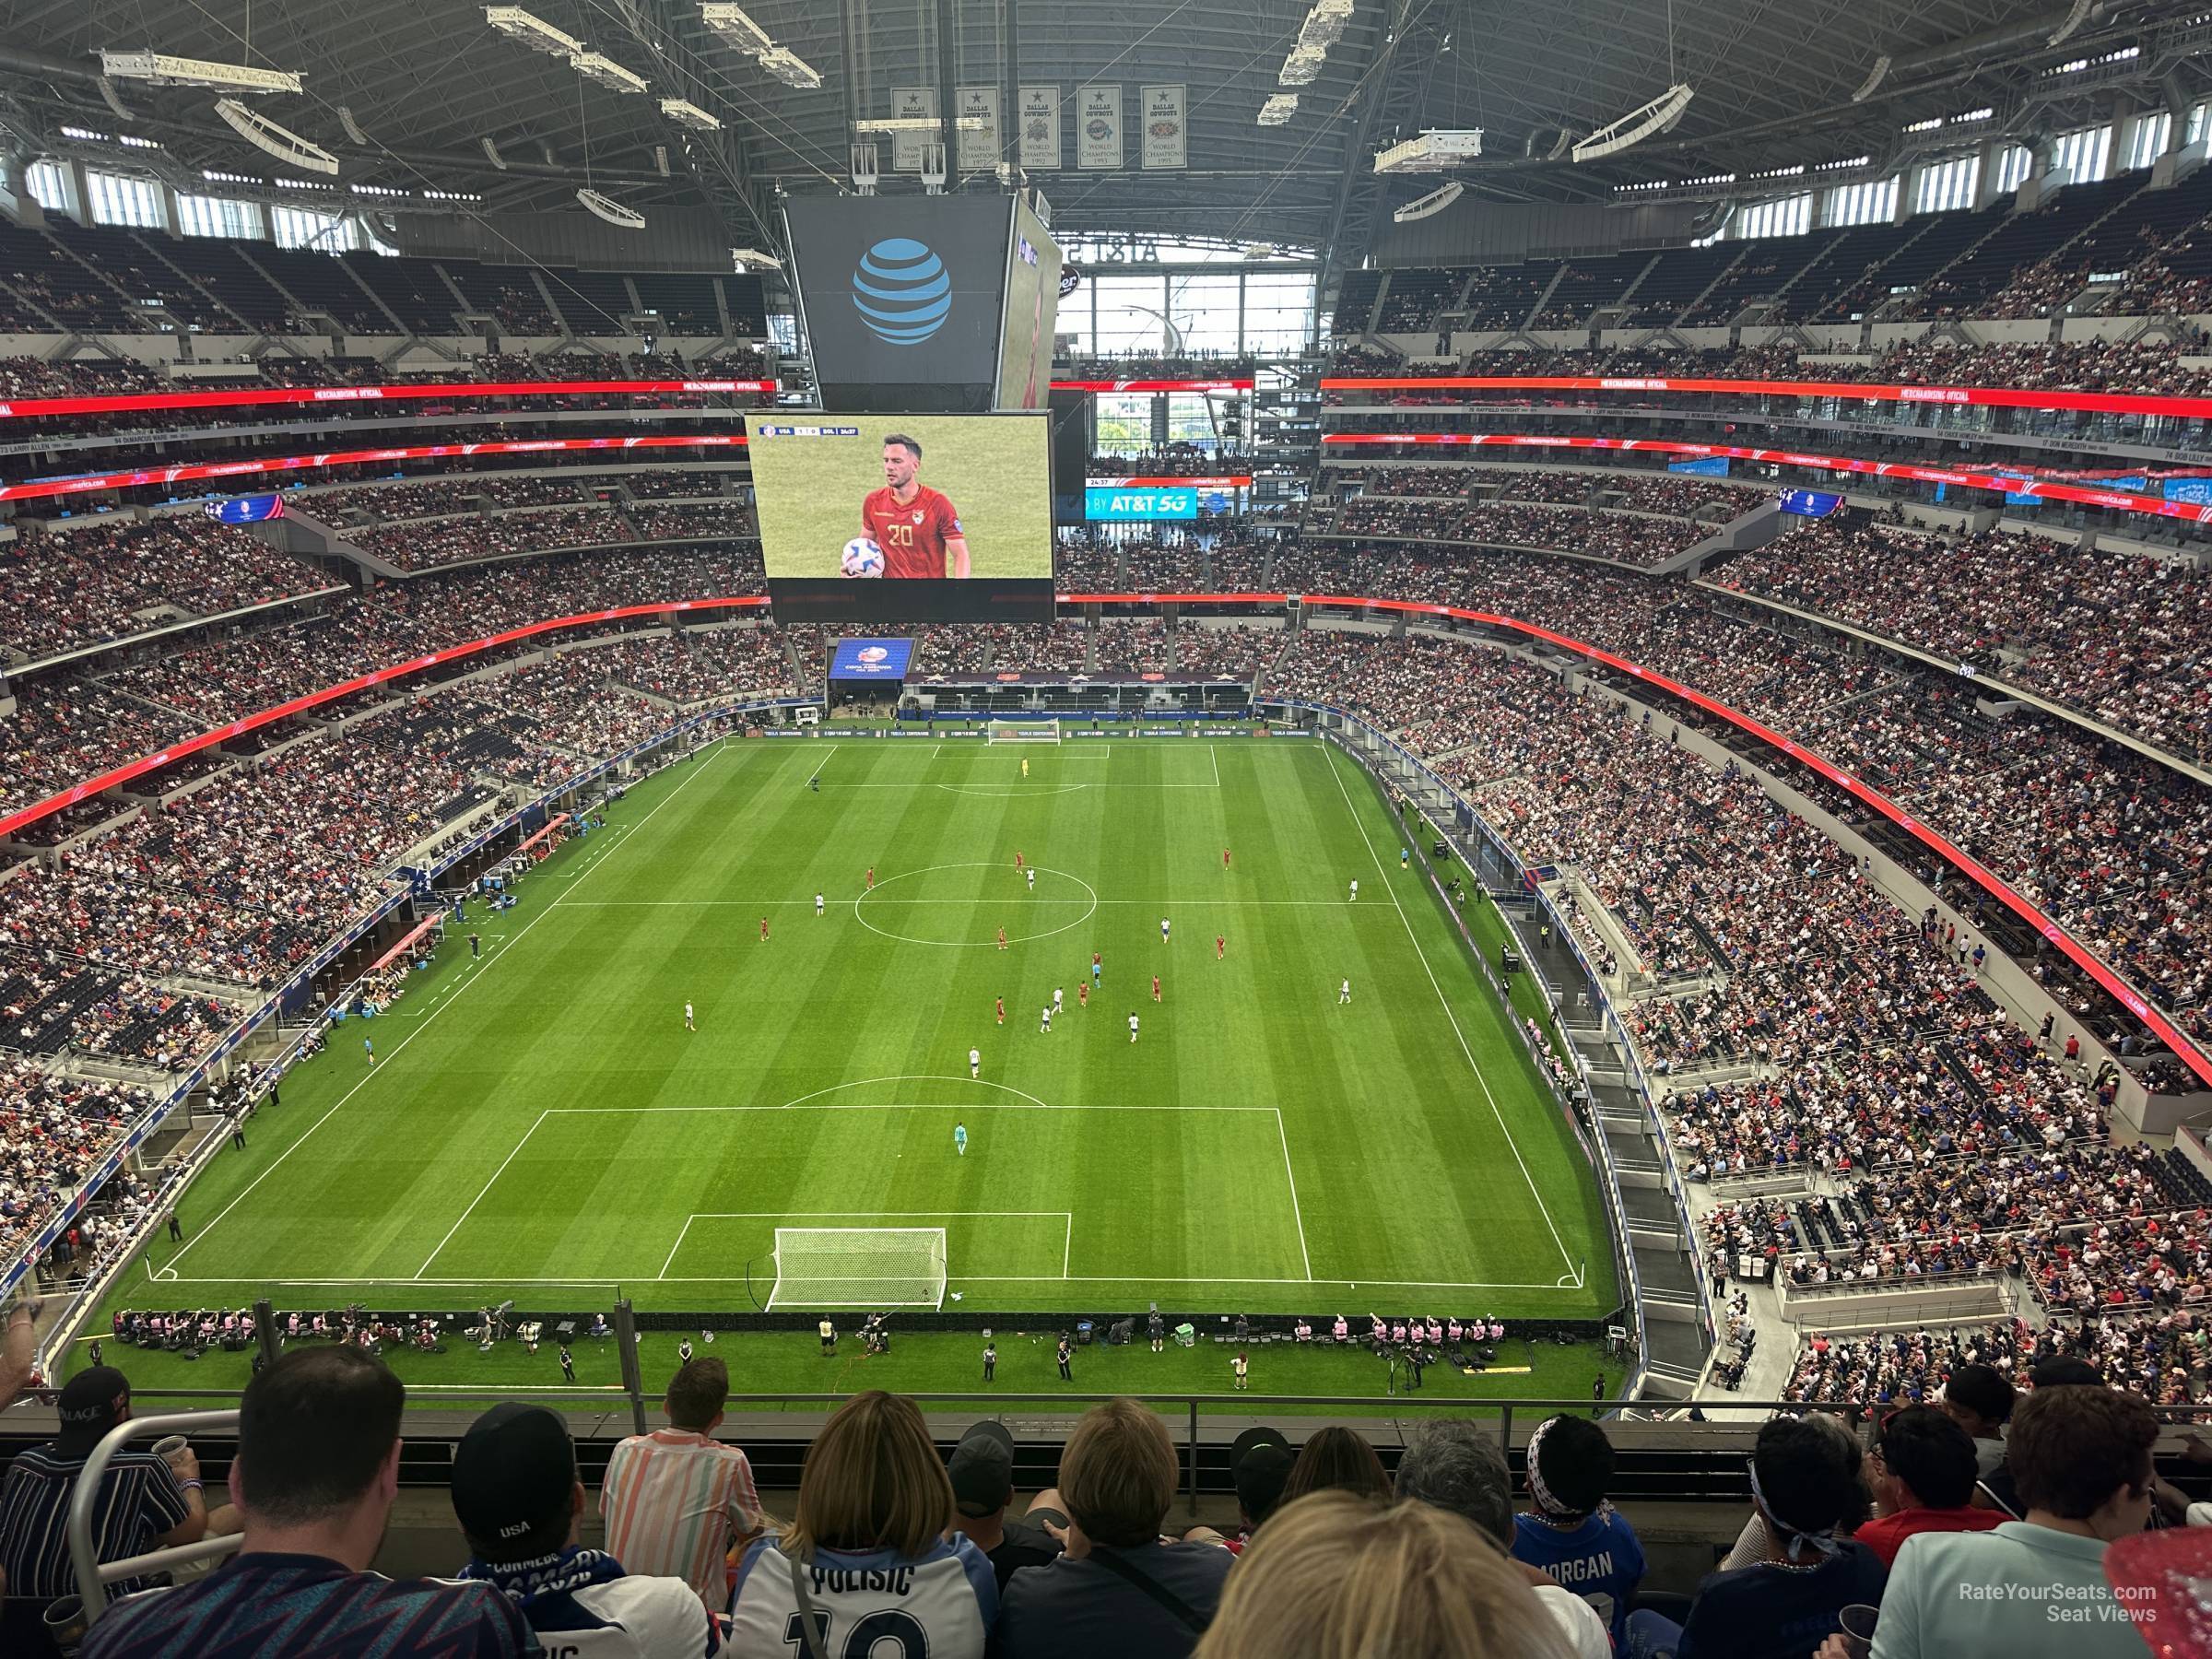 section 426, row 5 seat view  for soccer - at&t stadium (cowboys stadium)